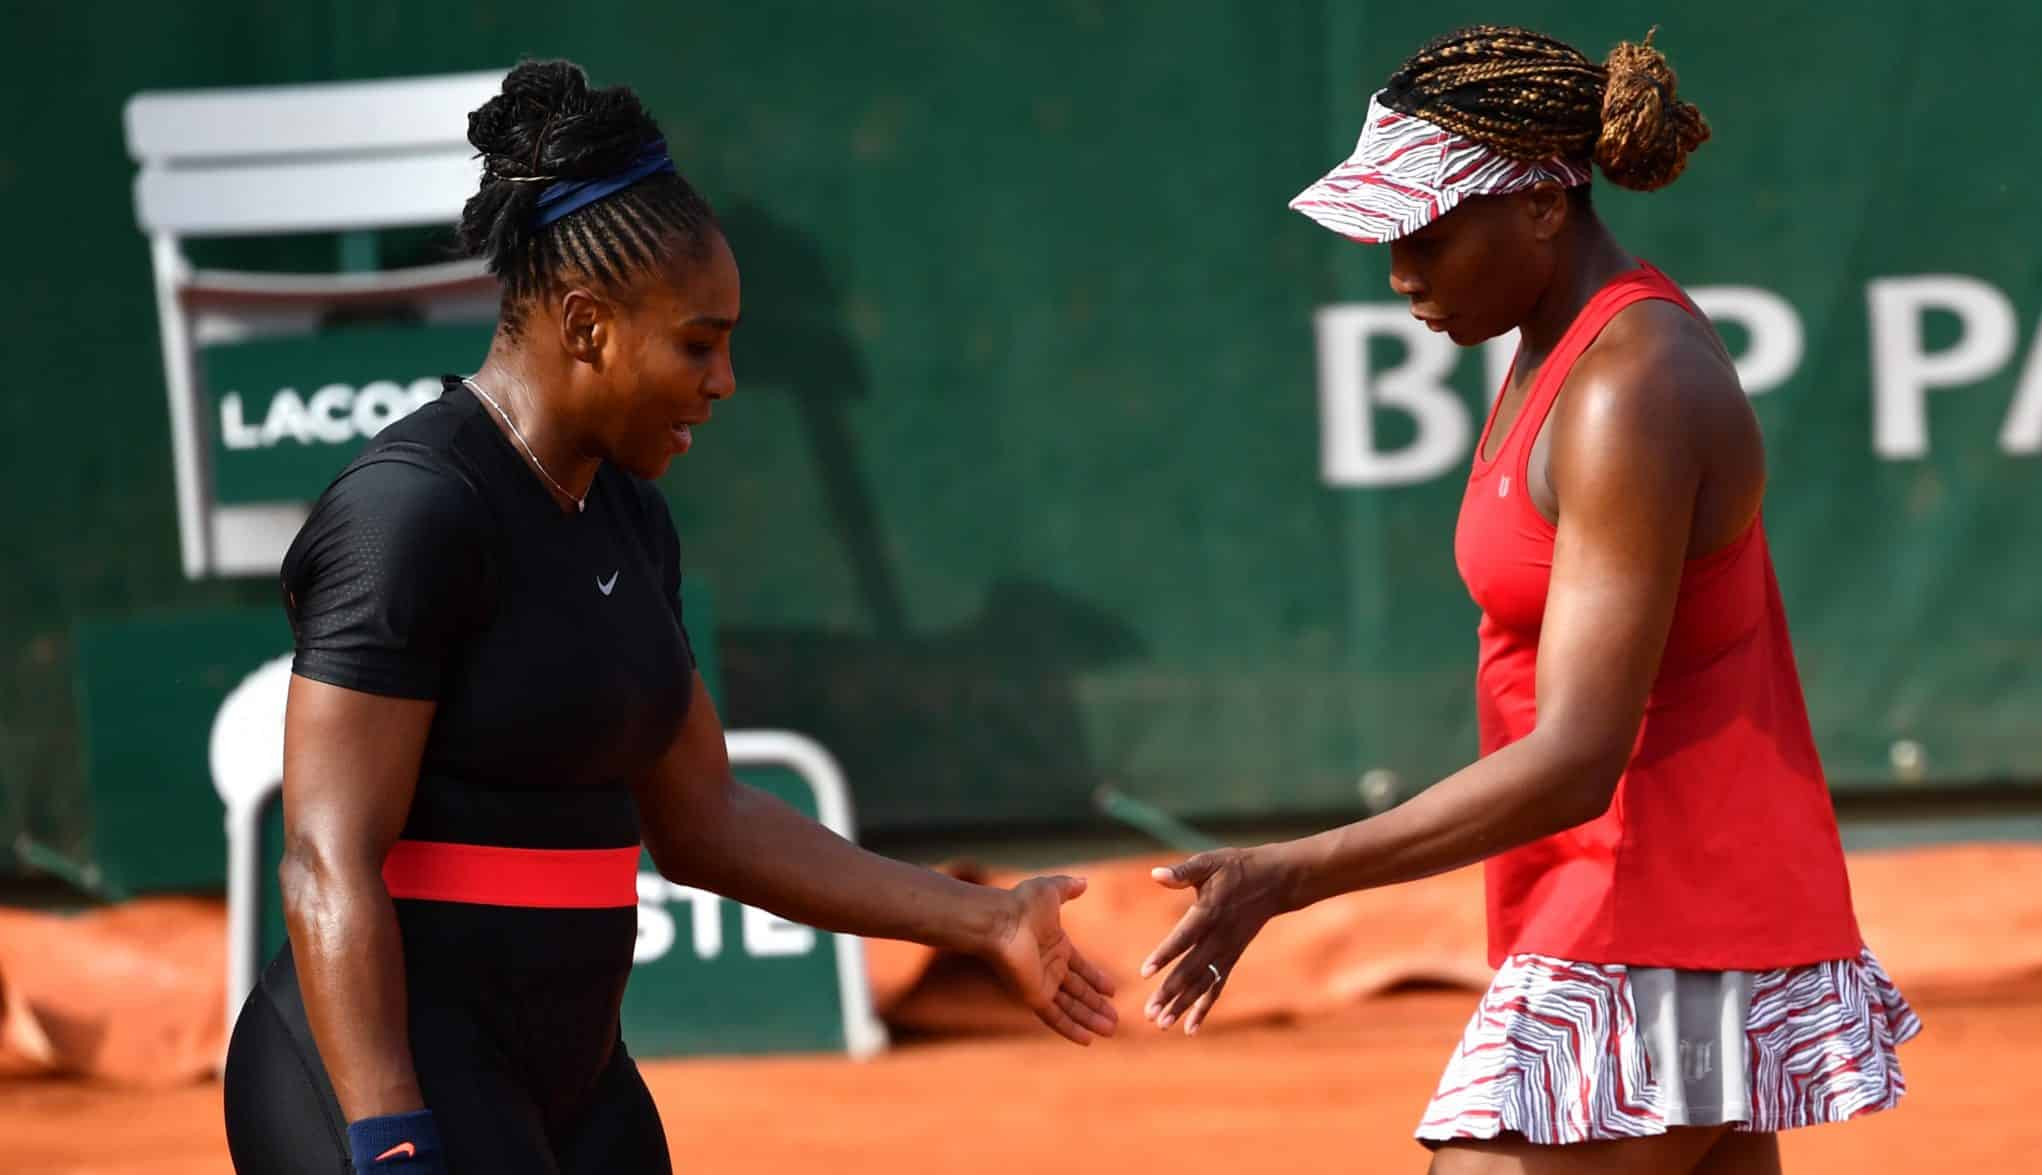 Venus and Serena Williams are set to face off in New York.